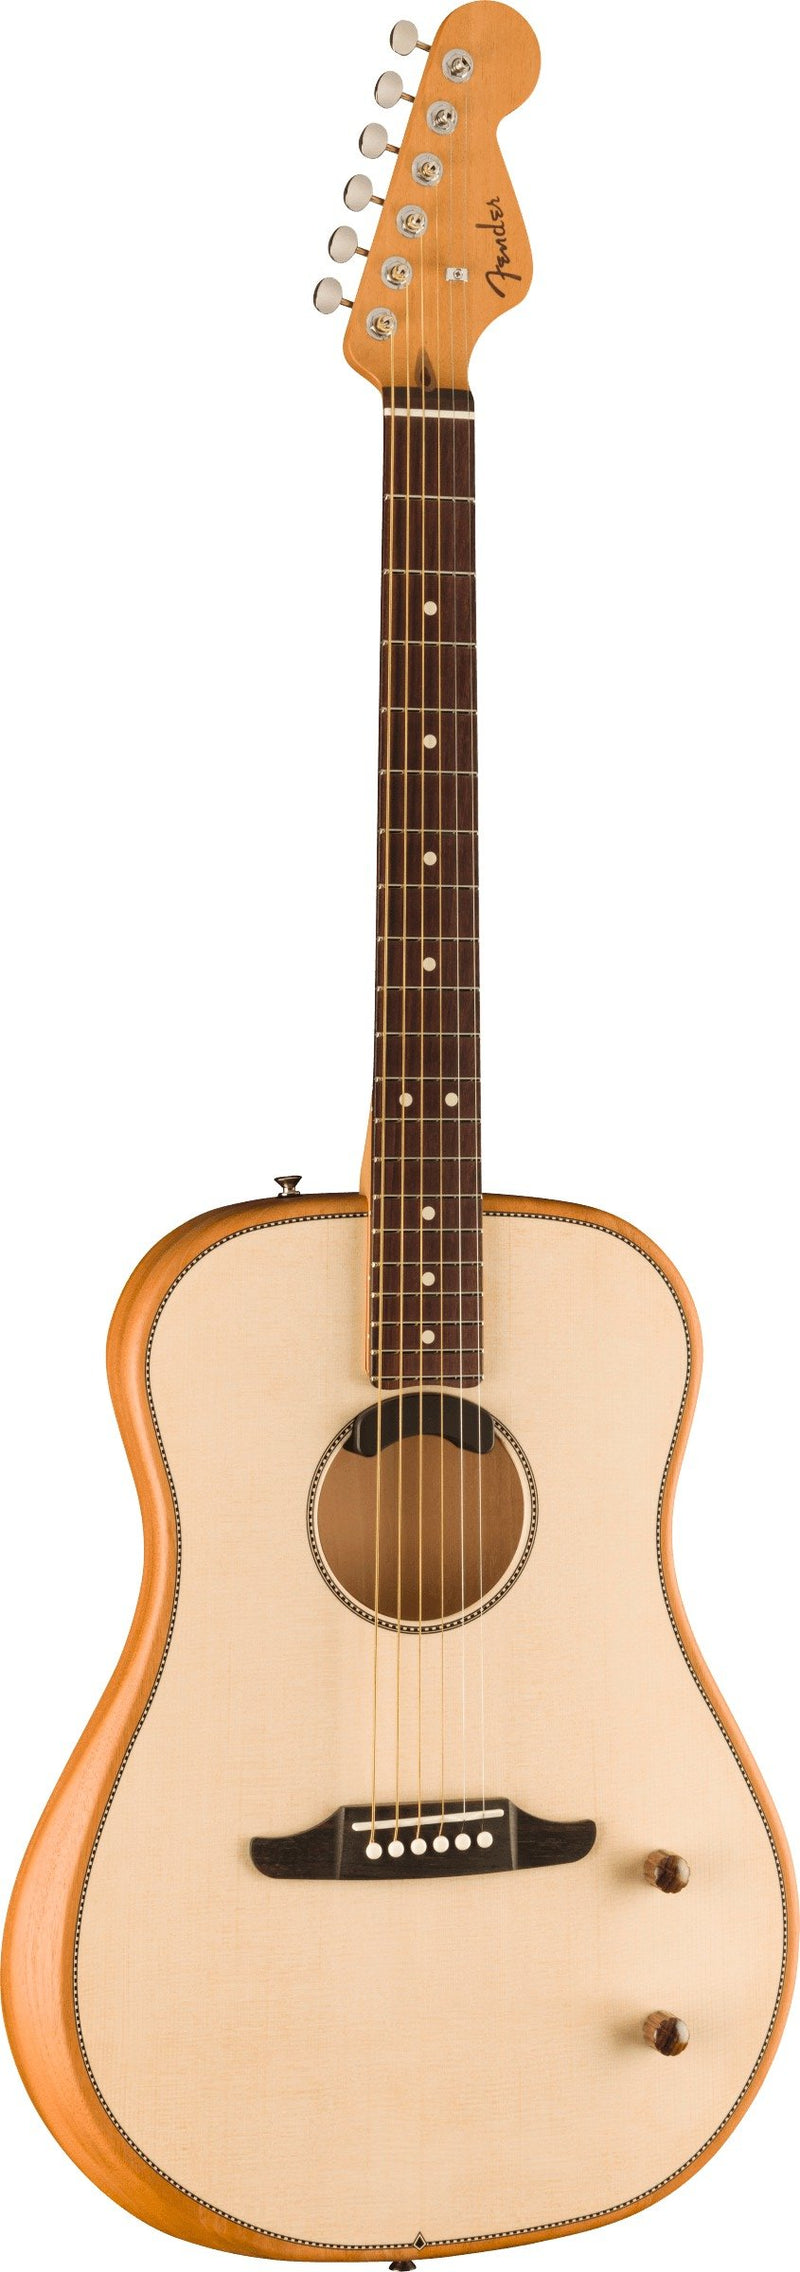 Fender Highway Series Dreadnought Acoustic Guitar